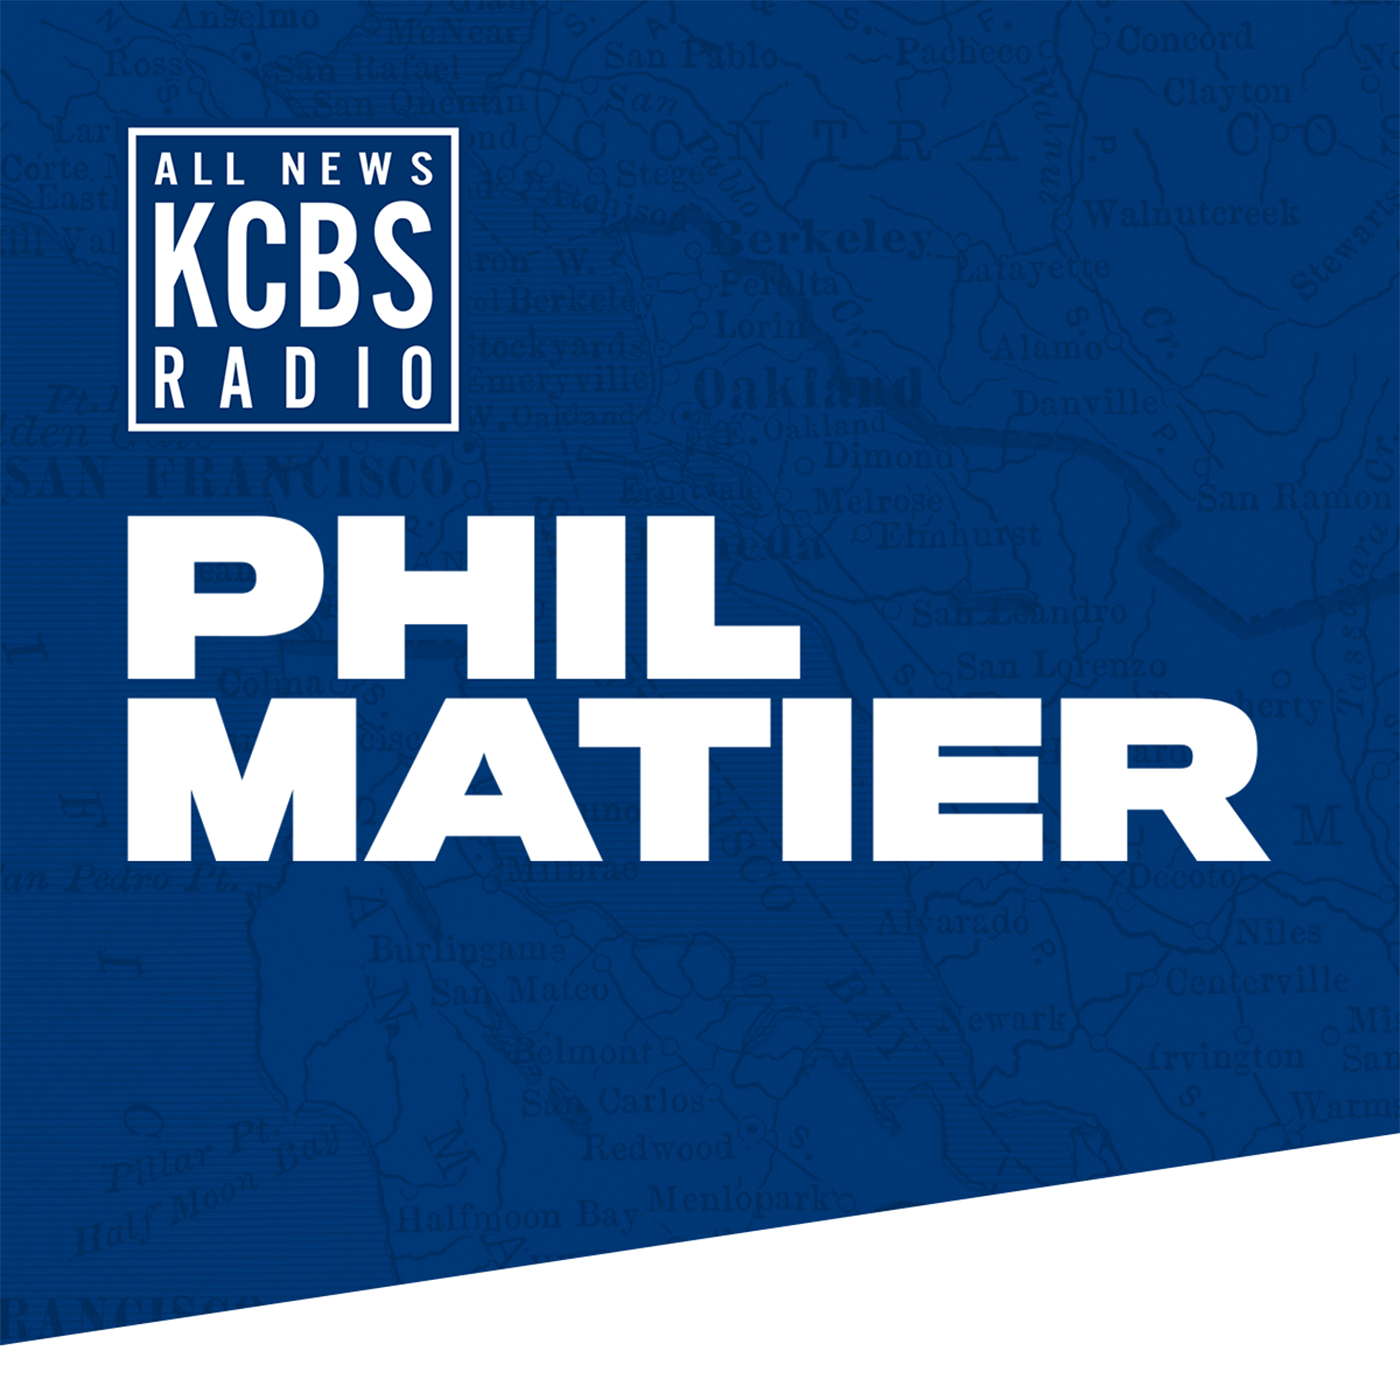 Phil Matier: SF's school superintendent to remain on the job